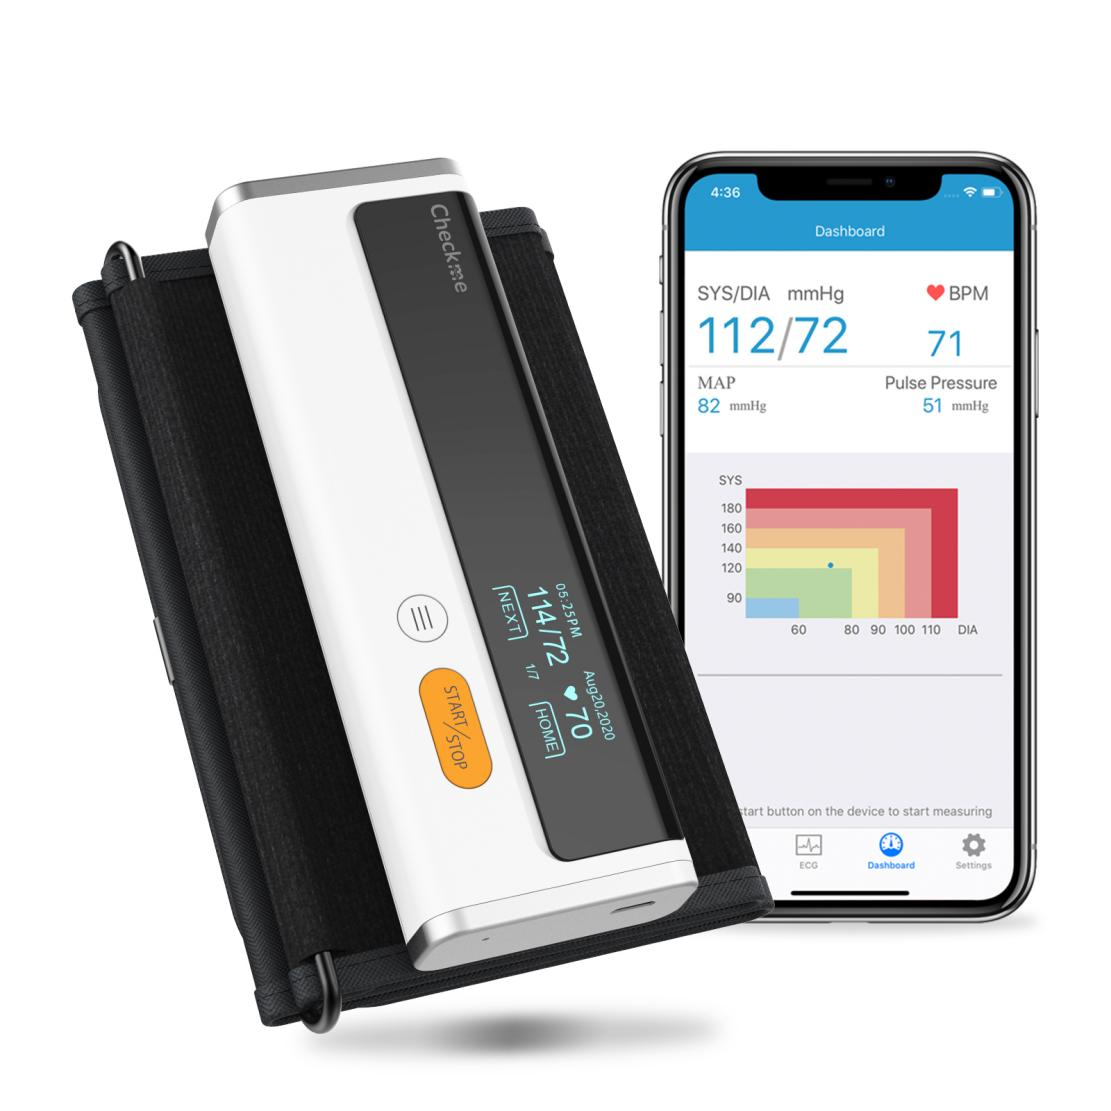 Introducing Checkme's Innovative ECG Monitor for Accurate Heart Health Readings